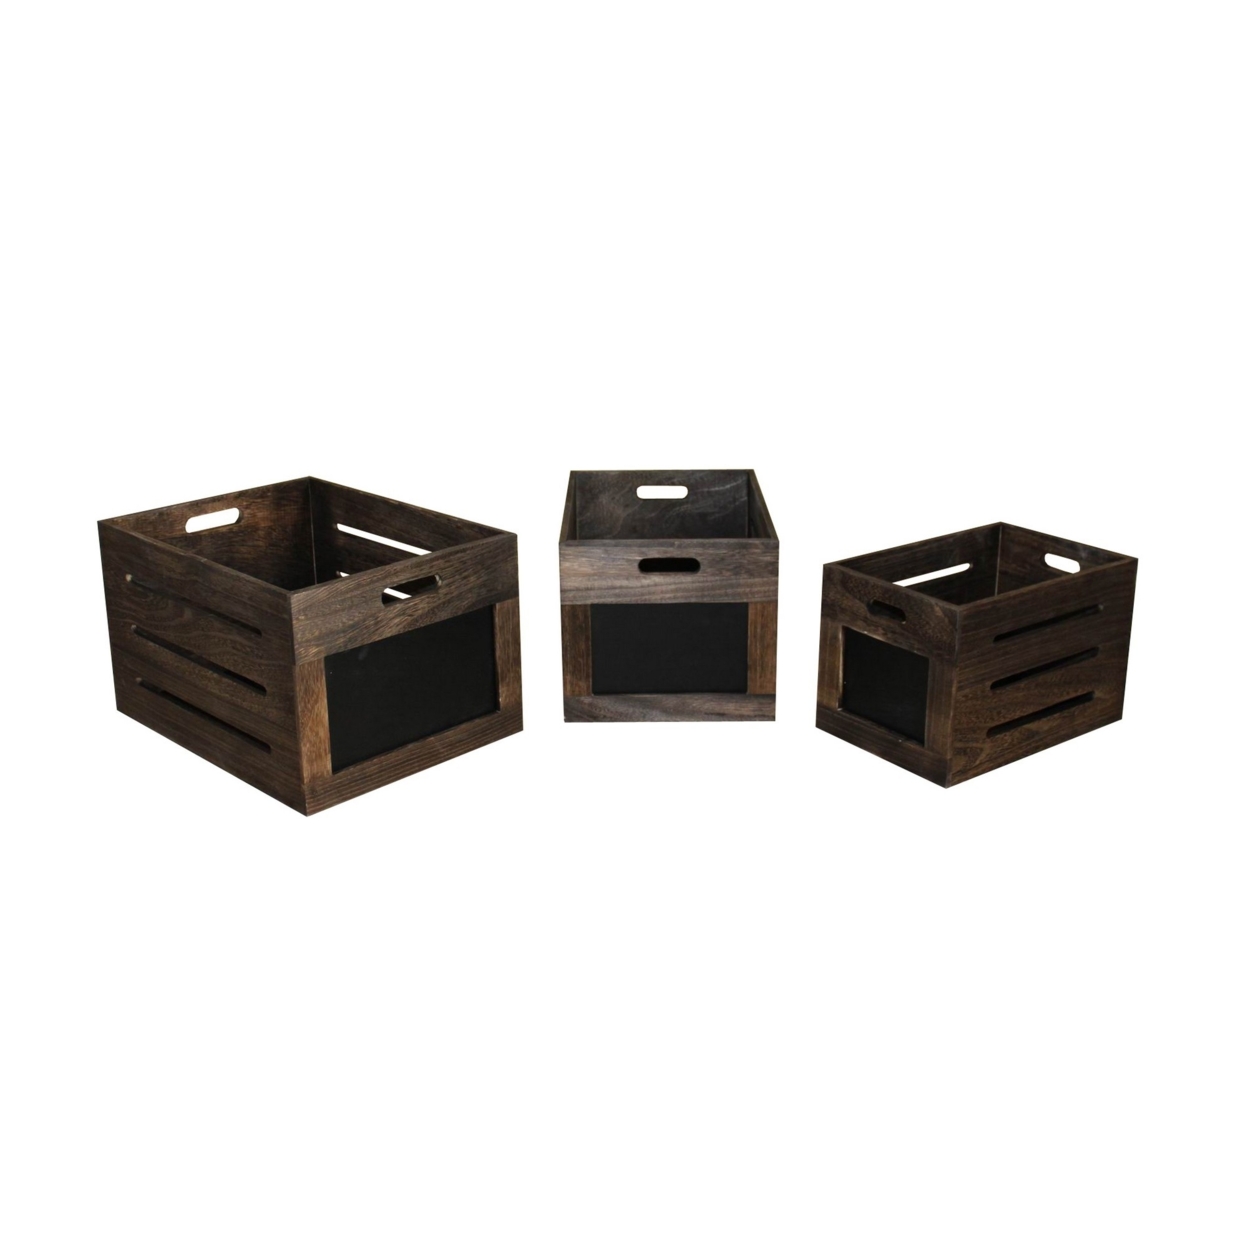 Cutout Design Wooden Box With Chalkboard Inserts, Set Of 3, Brown And Black- Saltoro Sherpi